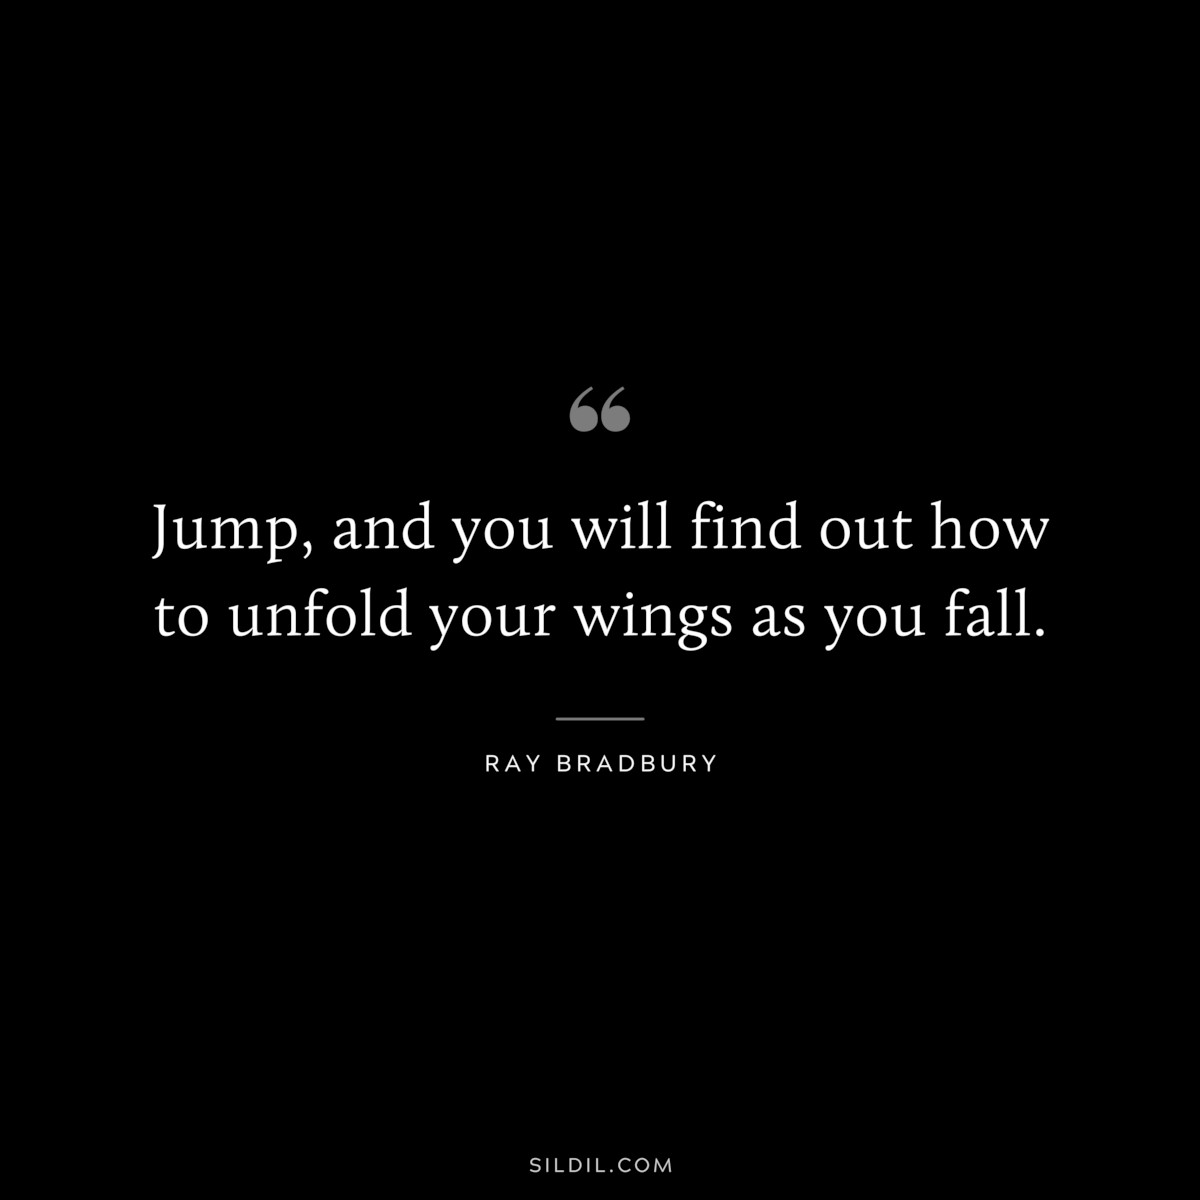 Jump, and you will find out how to unfold your wings as you fall. ― Ray Bradbury